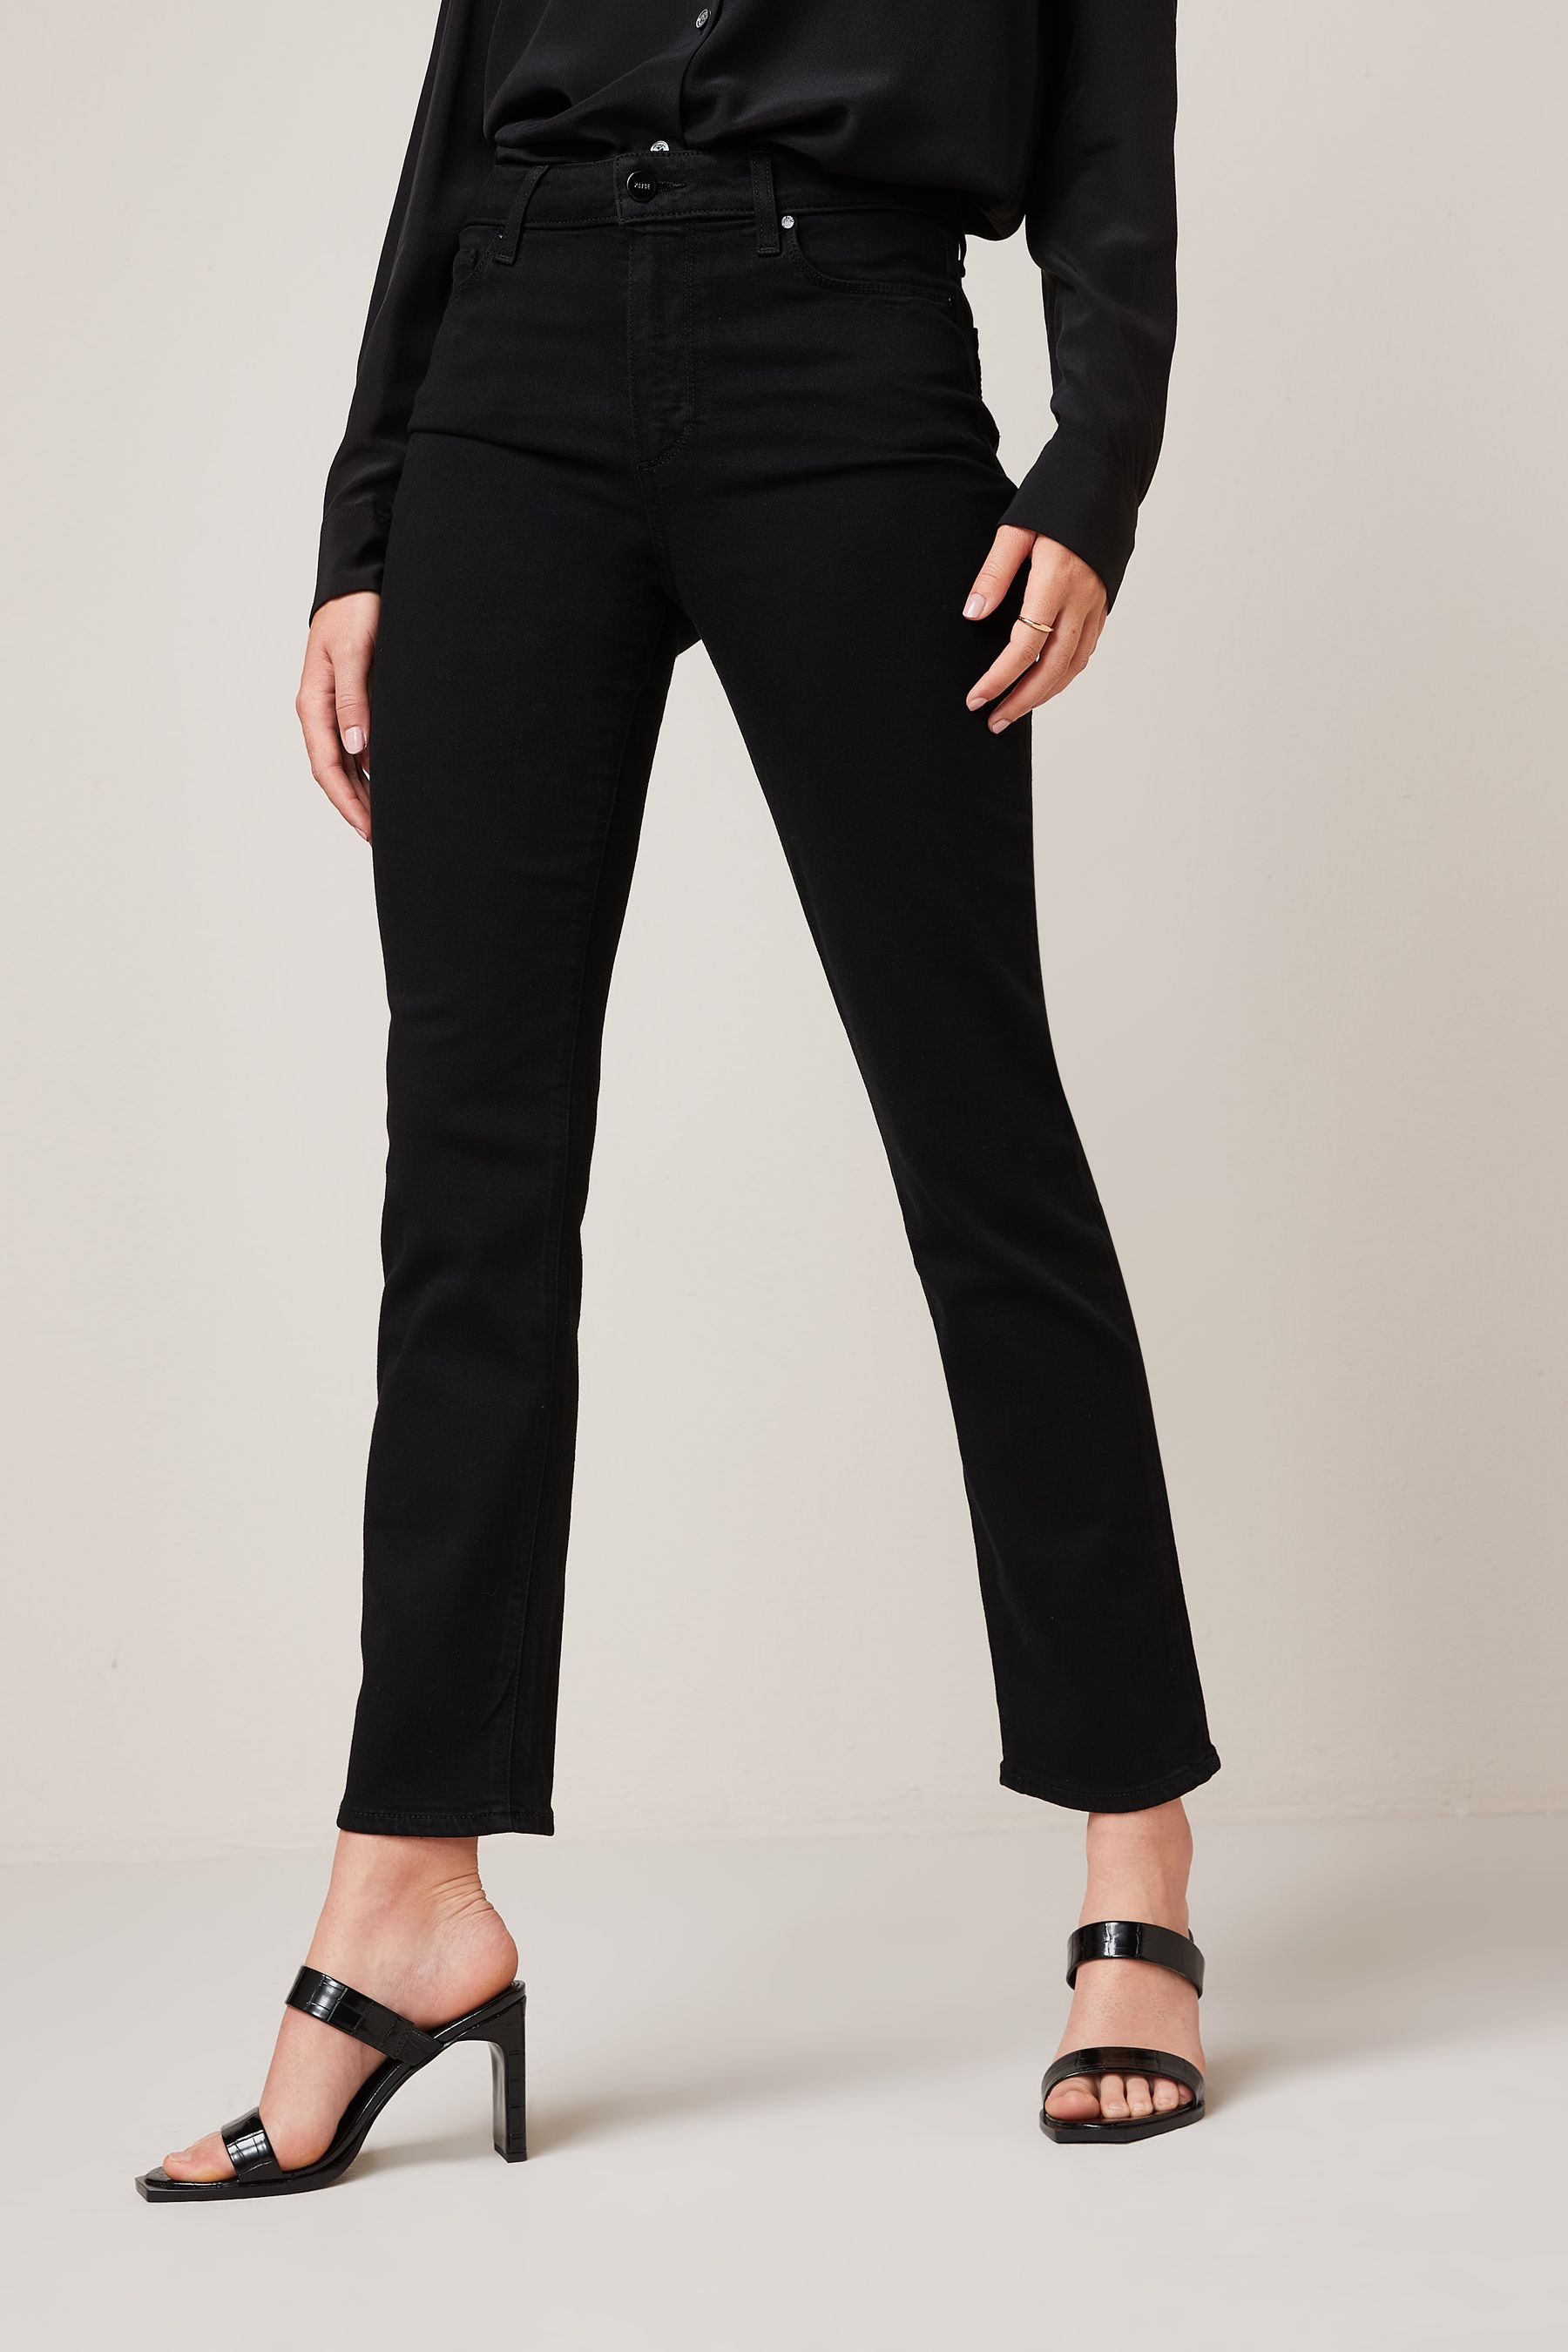 Buy Paige Cindy High Rise Straight Jeans from the Next UK online shop